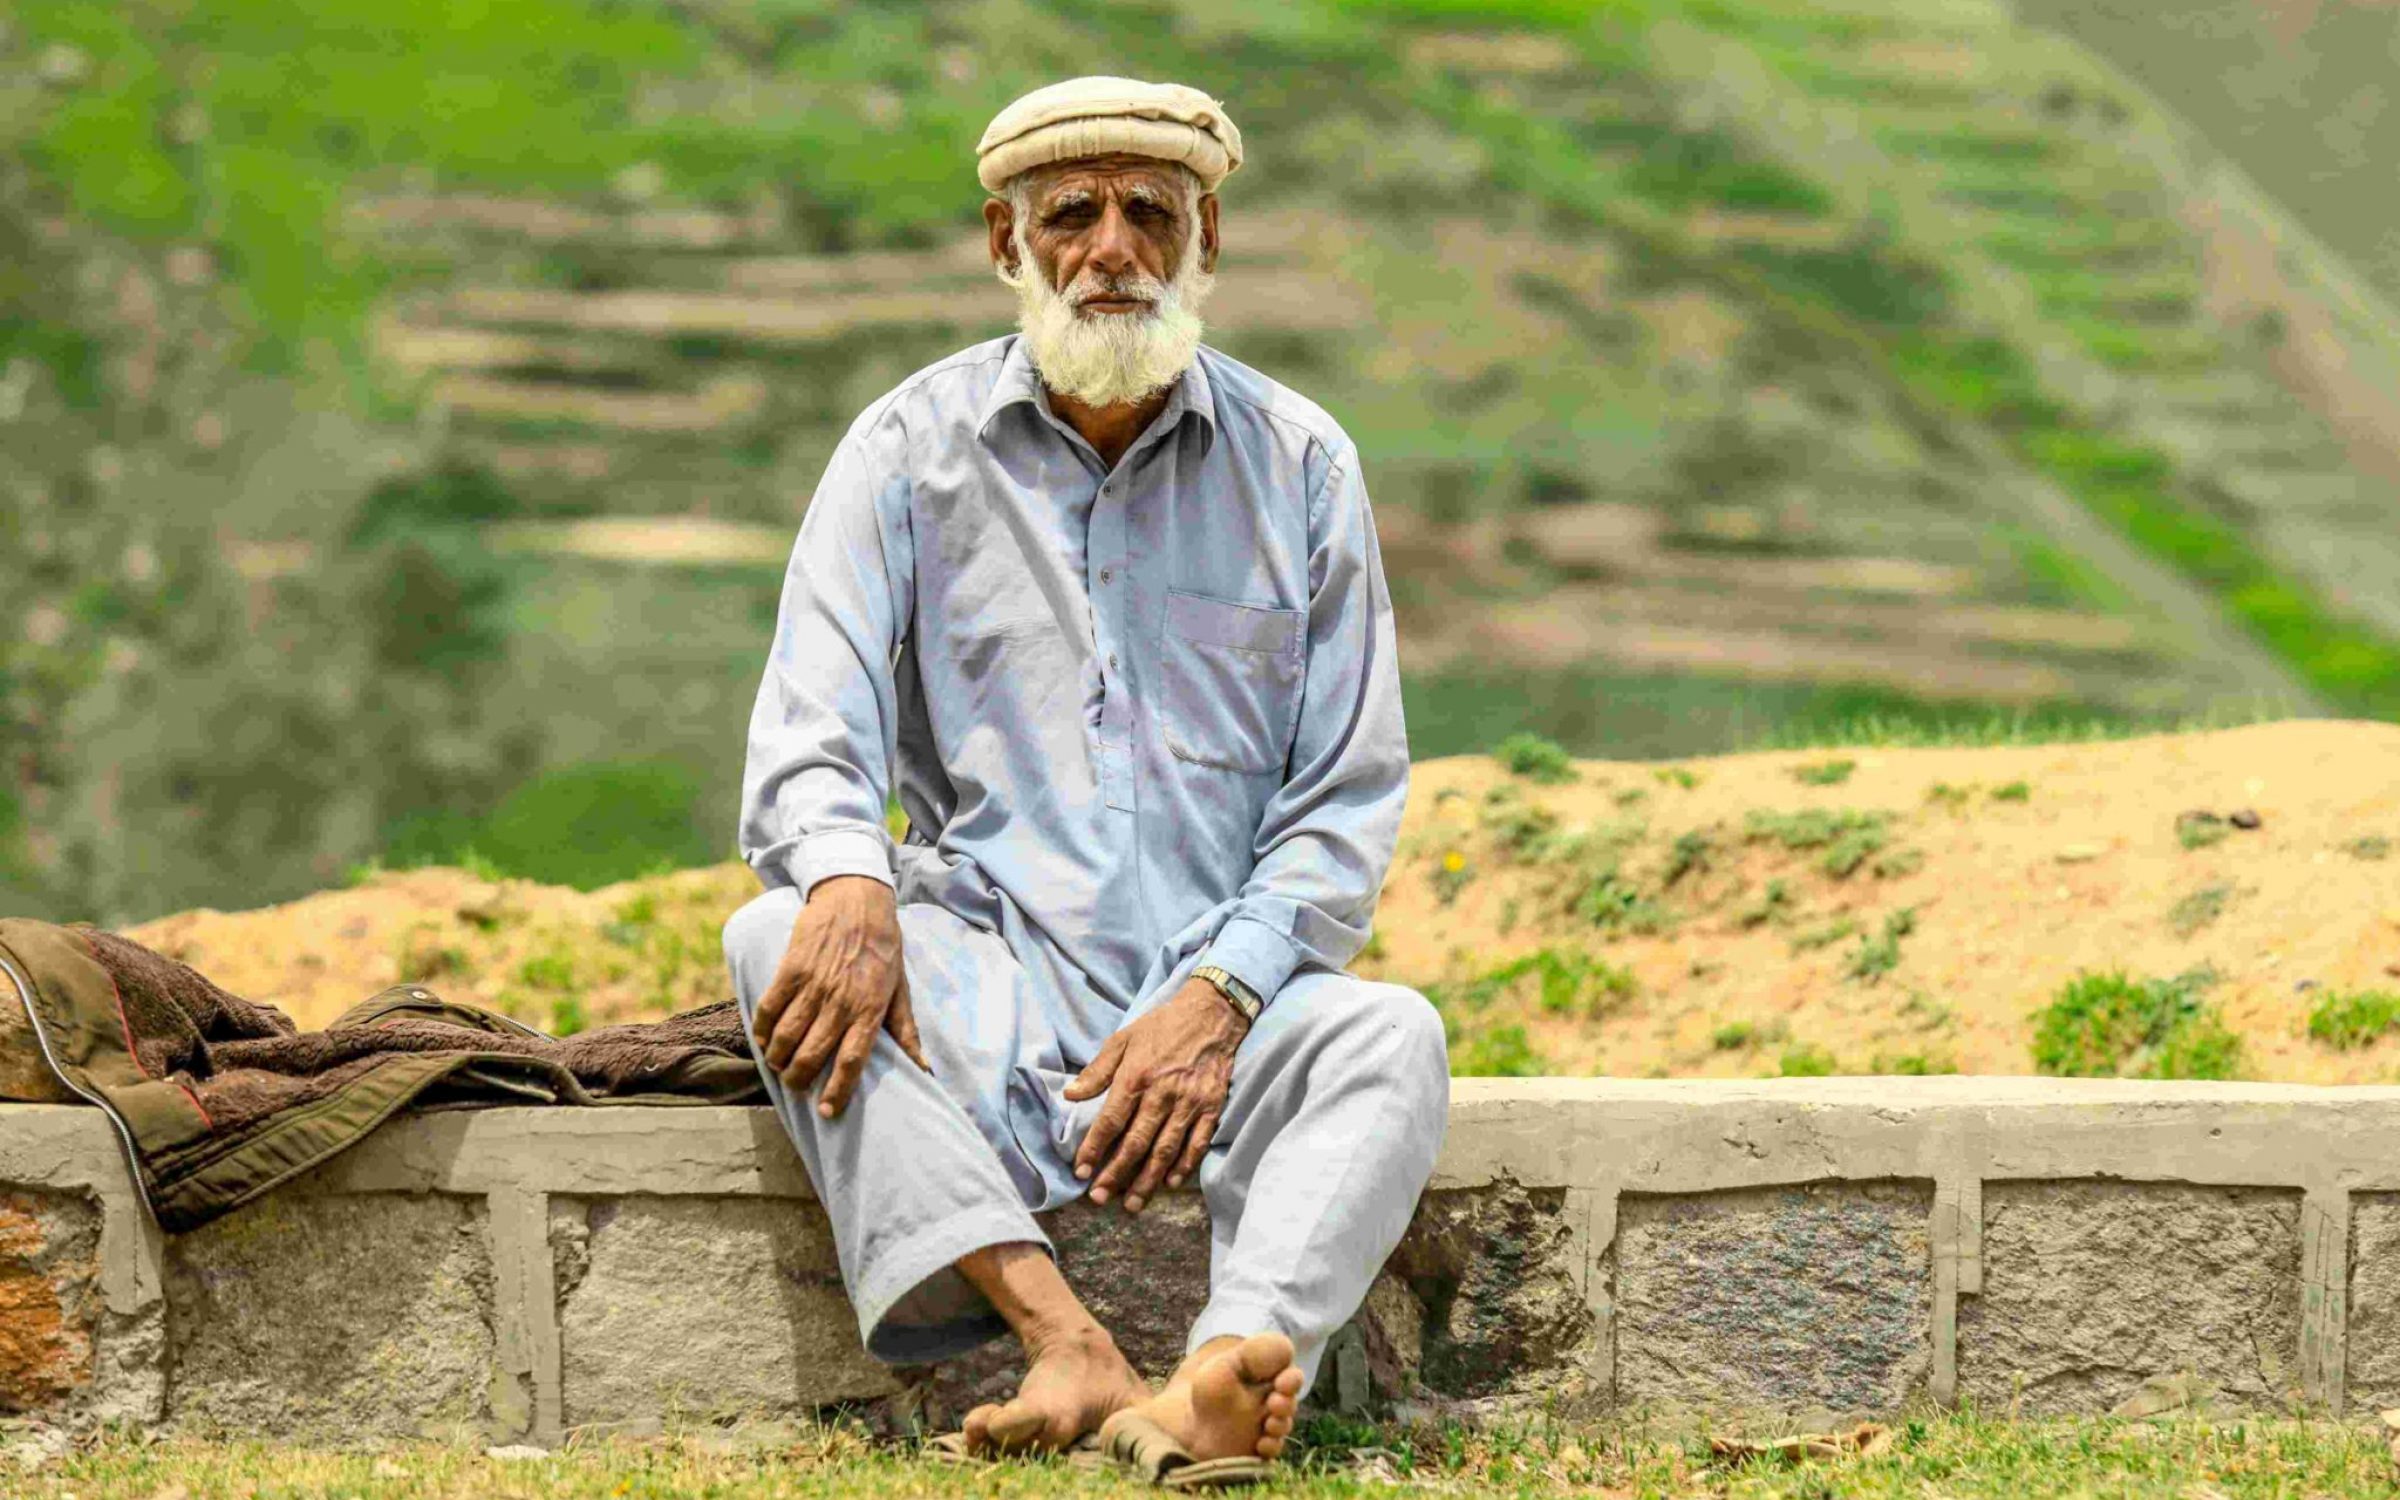 An old Afghan man sits by the road